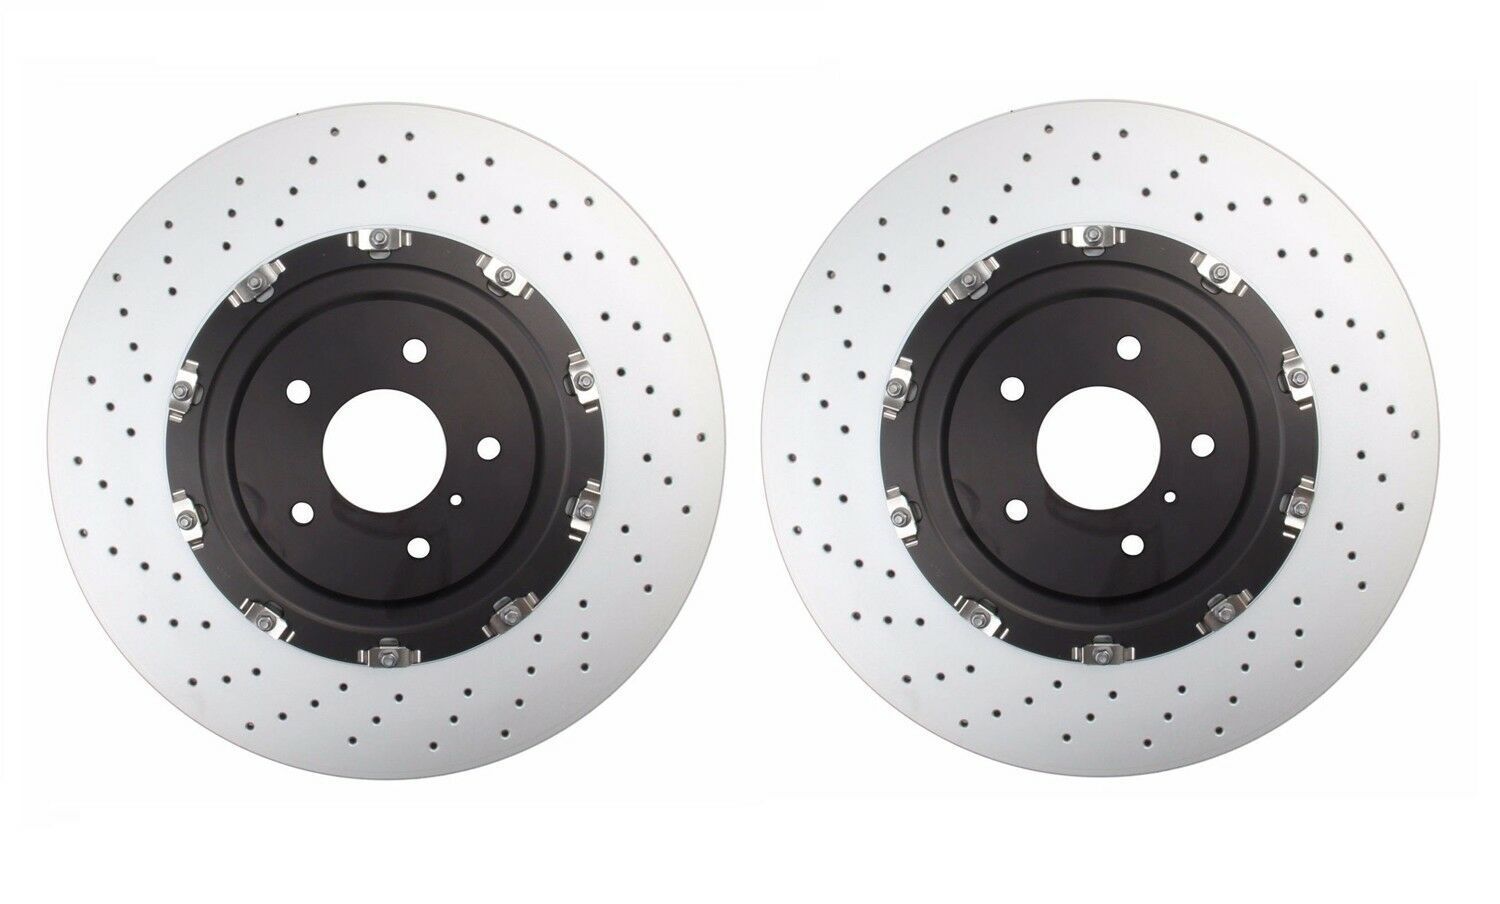 Brembo Pair Set 2 Front Floated Drilled 390mm Disc Brake Rotors For Nissan GT-R